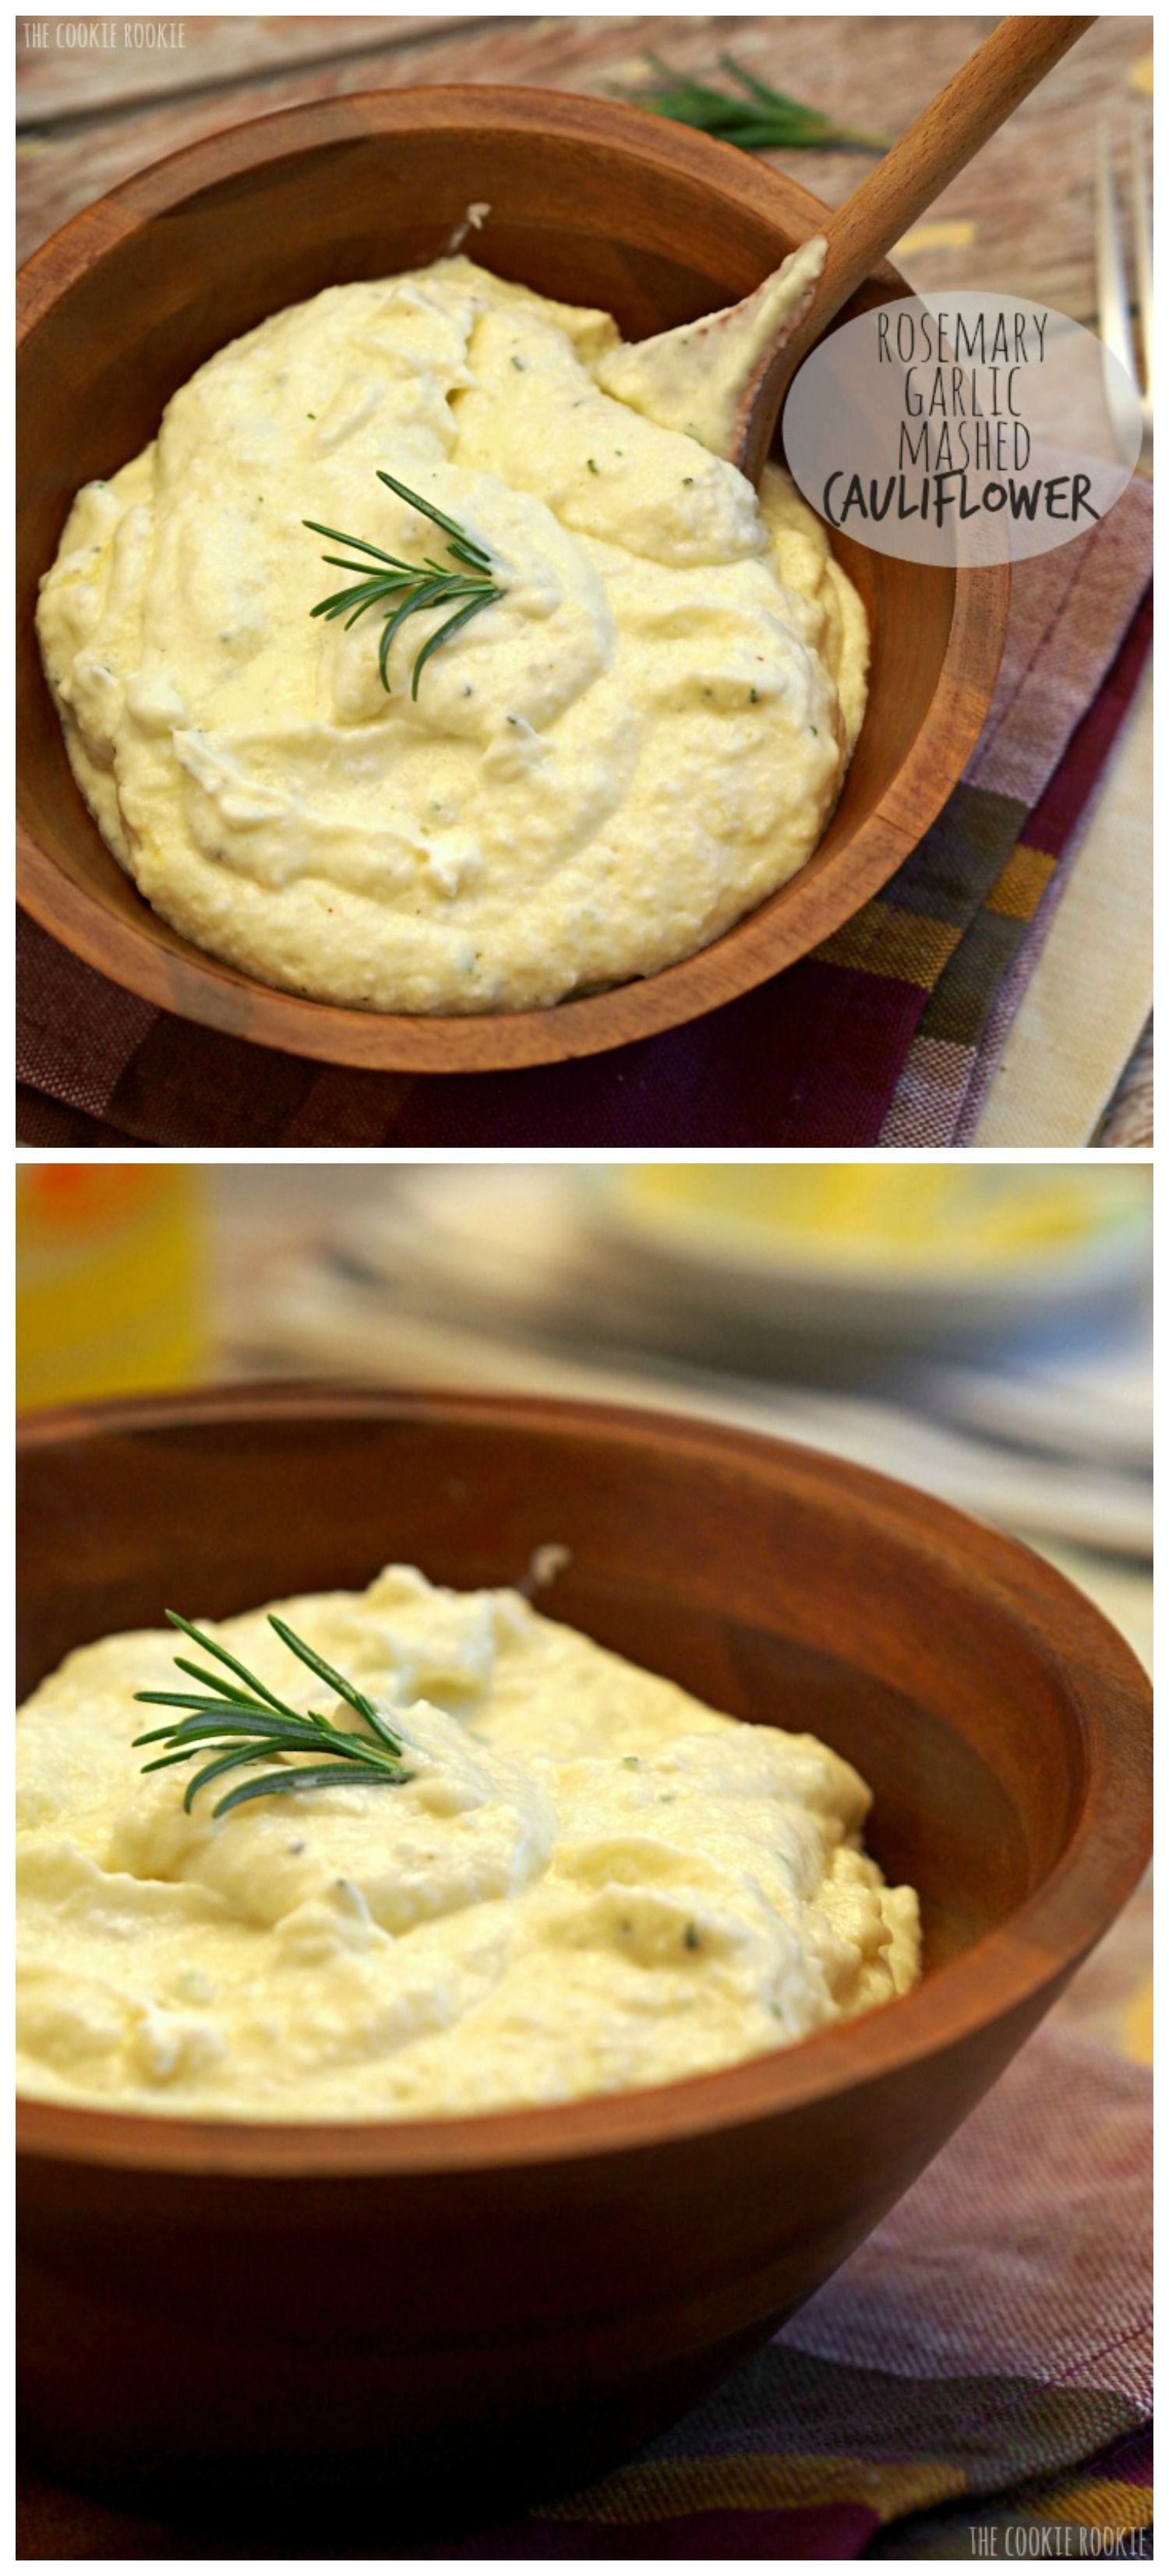 Rosemary Garlic Mashed Cauliflower! Healthy and delicious alternative to mashed potatoes. Perfect Thanksgiving side dish! | The